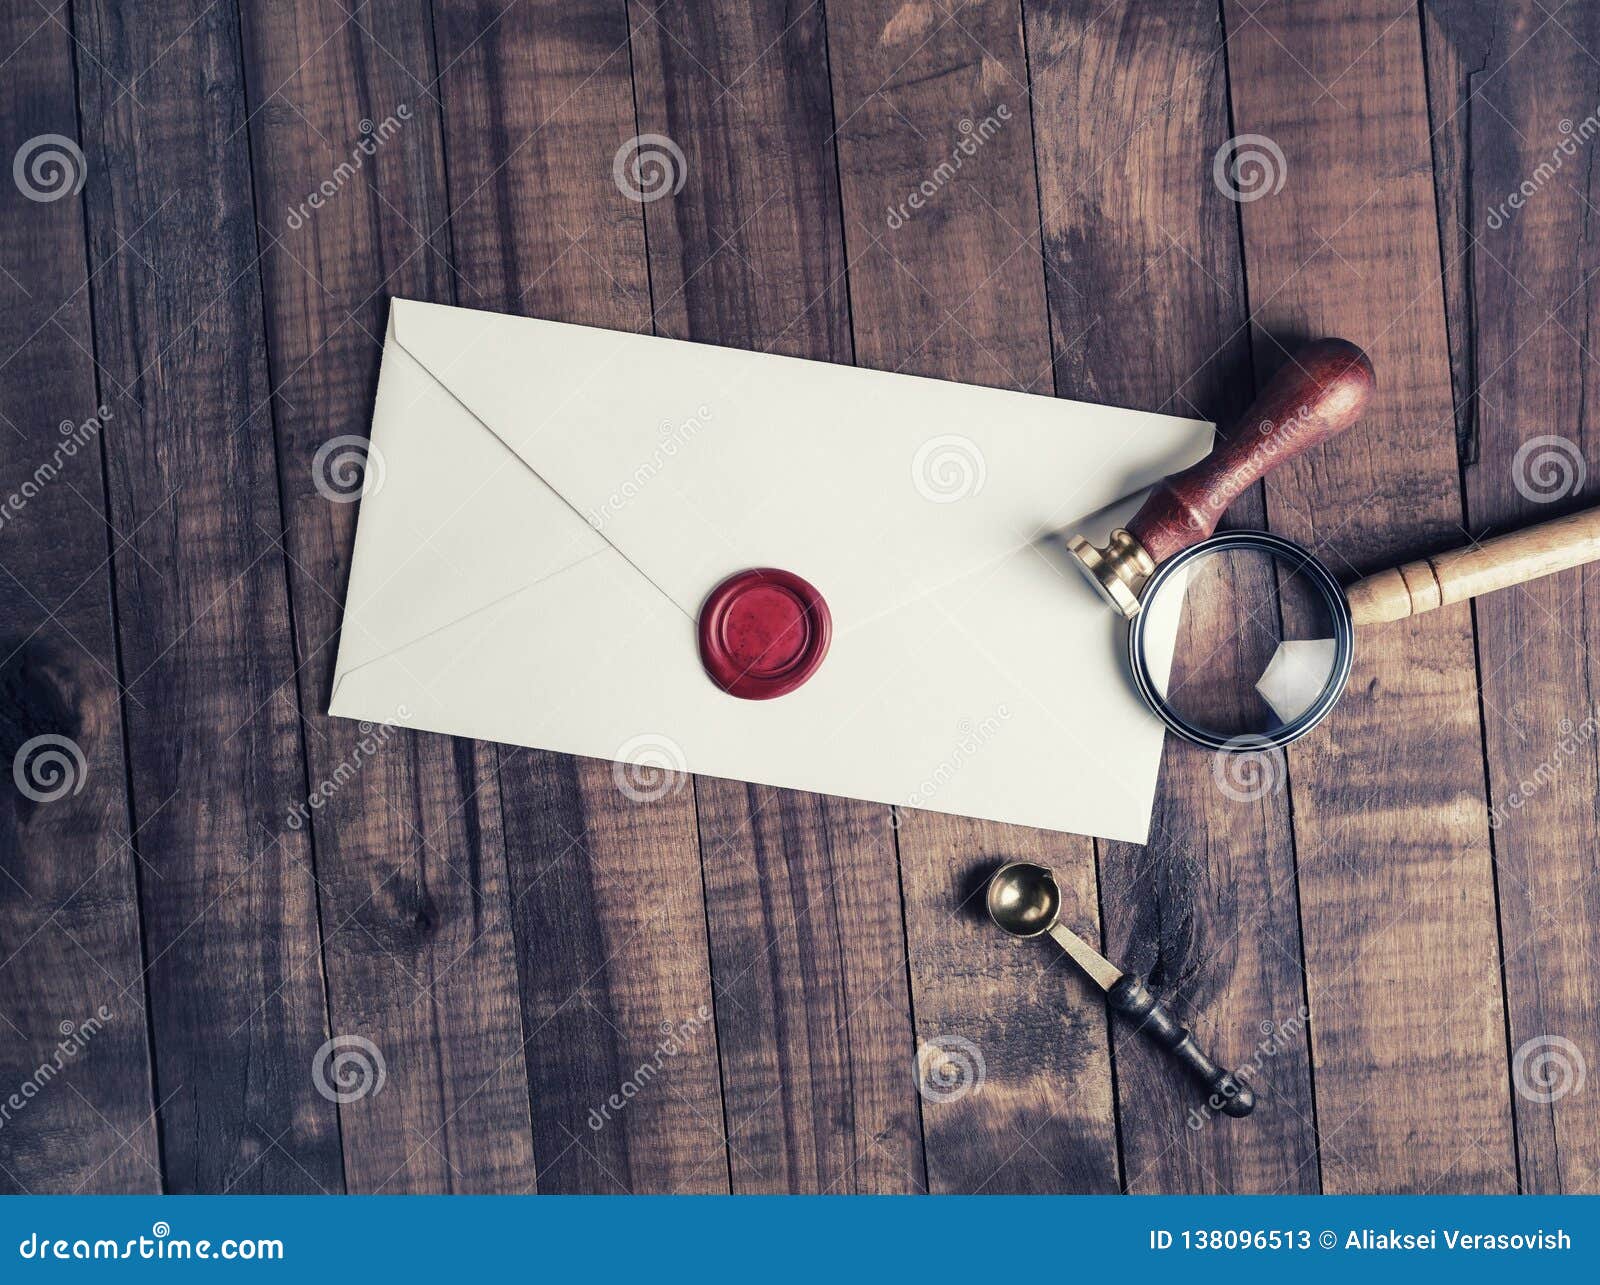 Envelope with wax seal stock image. Image of seal, postal ...